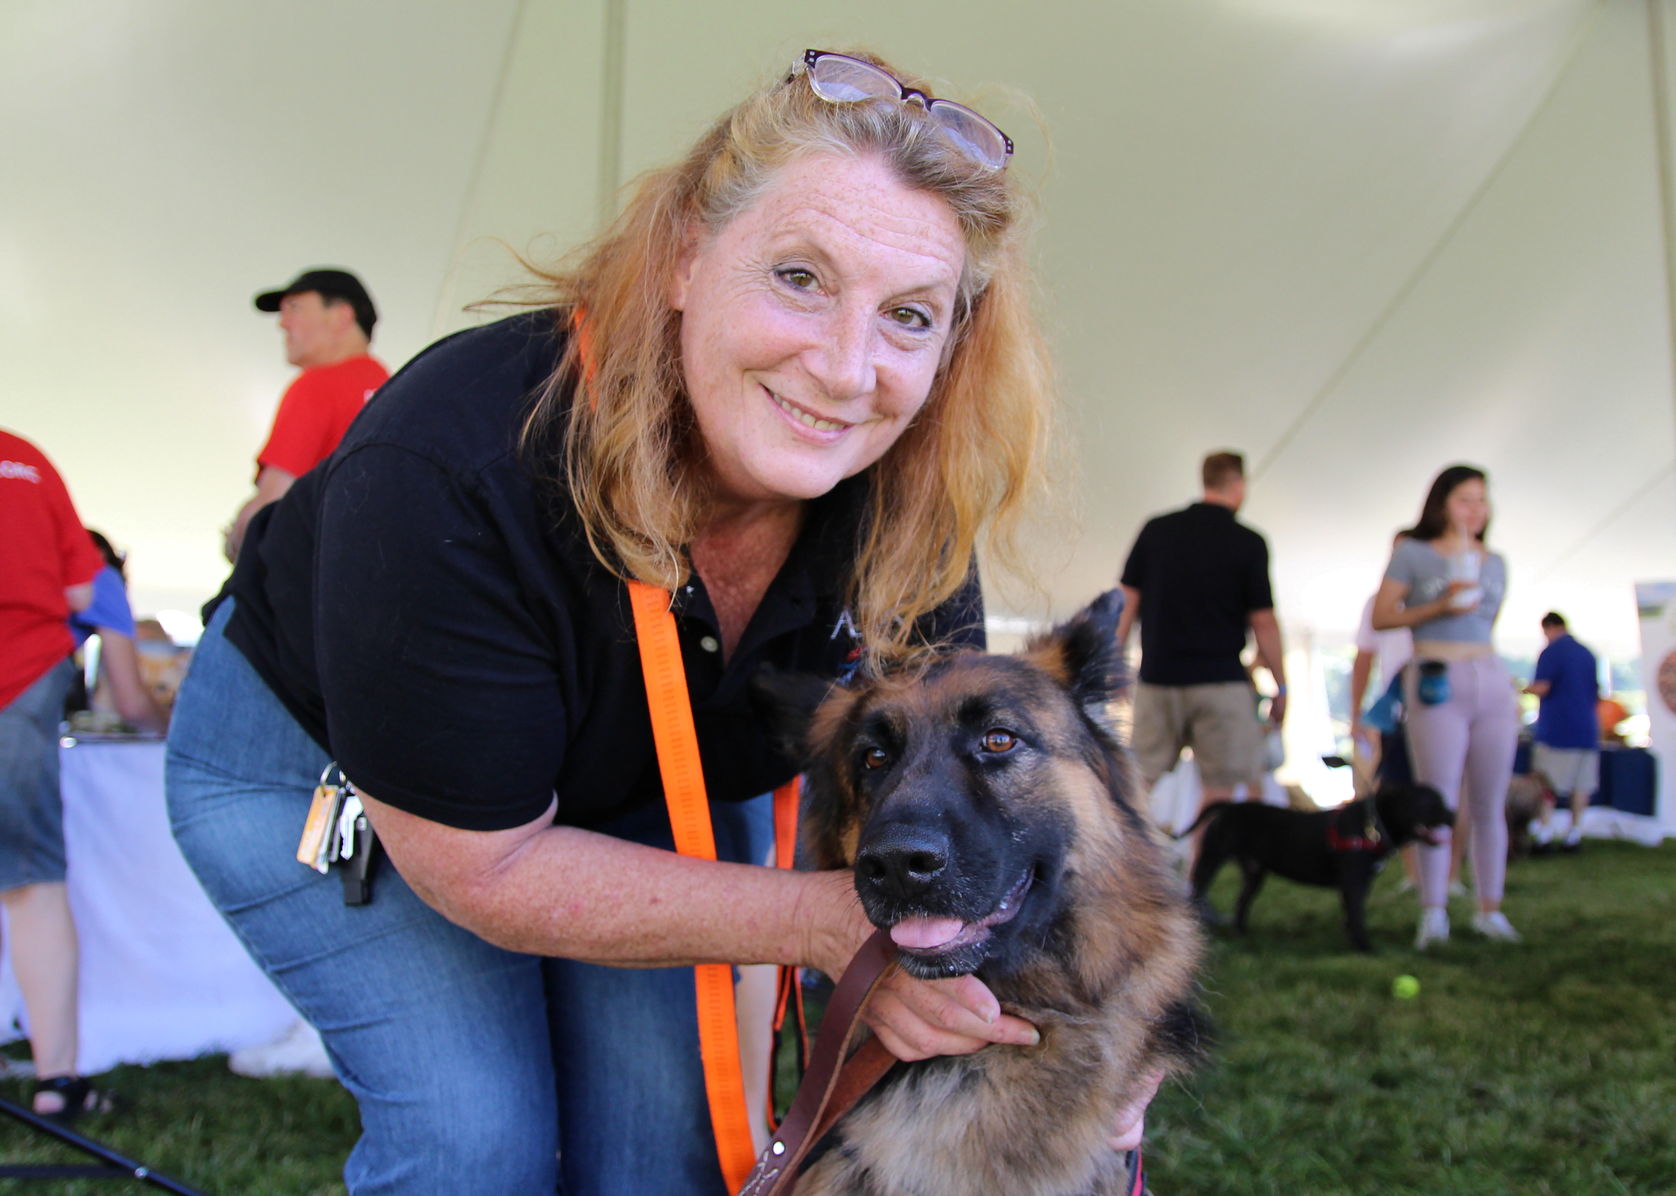 Tina Zinn with ARK Charities at Puttin on the Dog, Sept 16, 2018 Photo: Leslie Yager